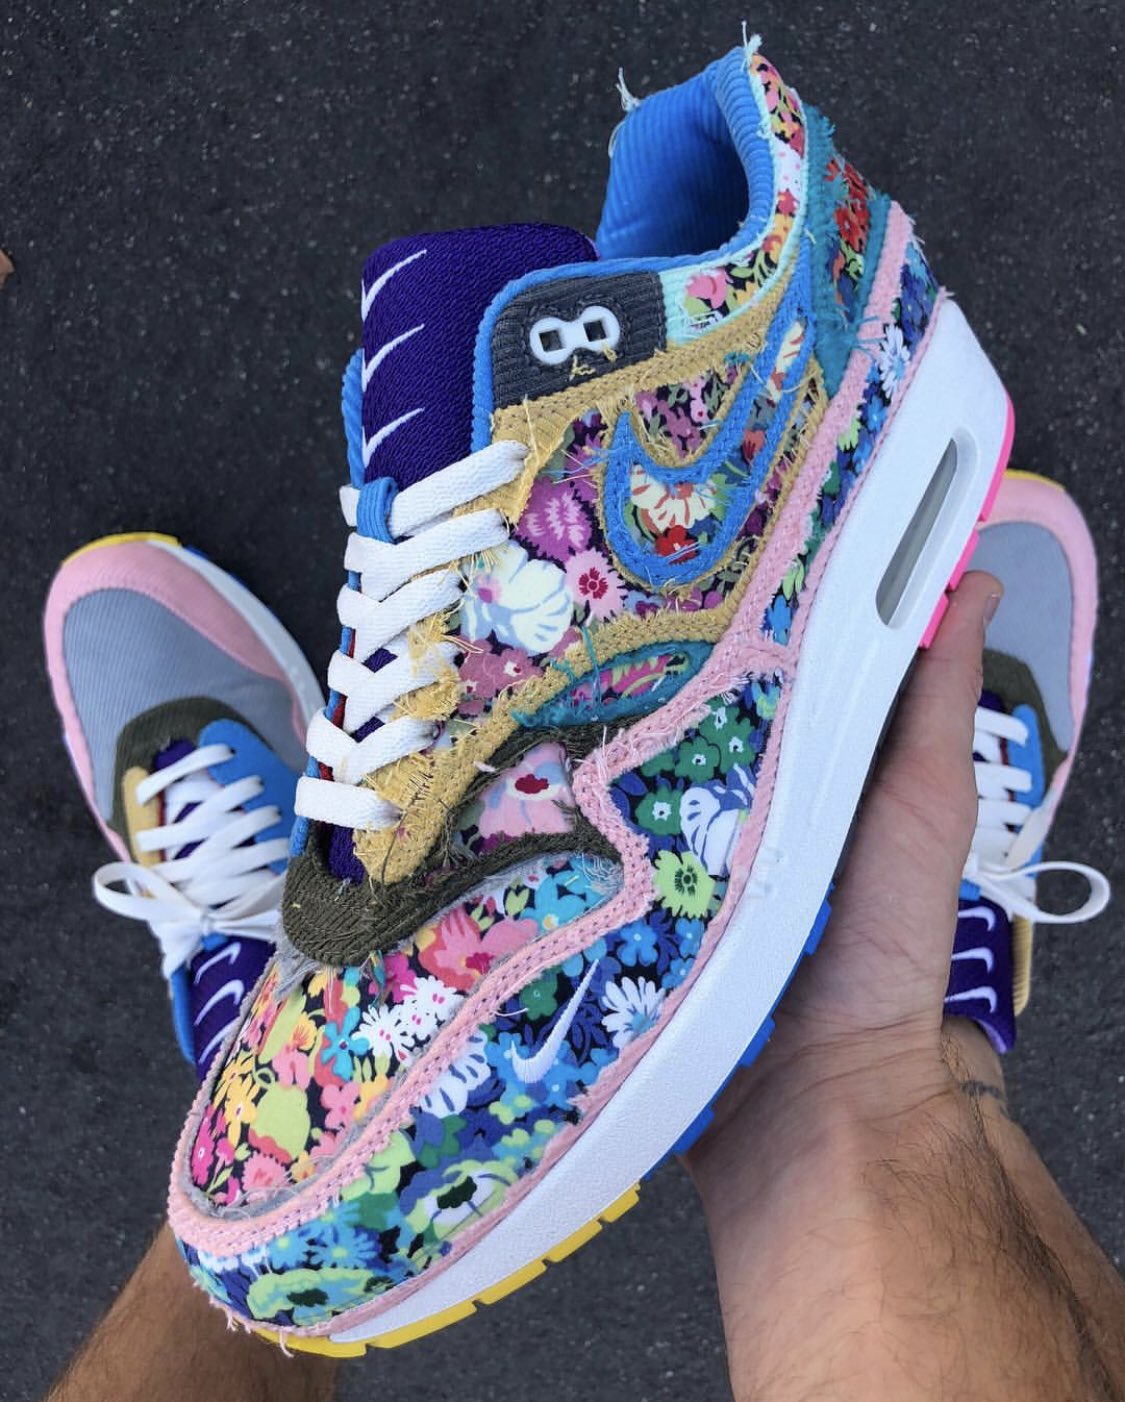 B/R Kicks on Twitter: "Sean Wotherspoon and created a 1 of 2 Bespoke Air Max 1 featuring corduroy tear-away to liberty fabric floral 👀 https://t.co/d6K5xDevpu" / Twitter